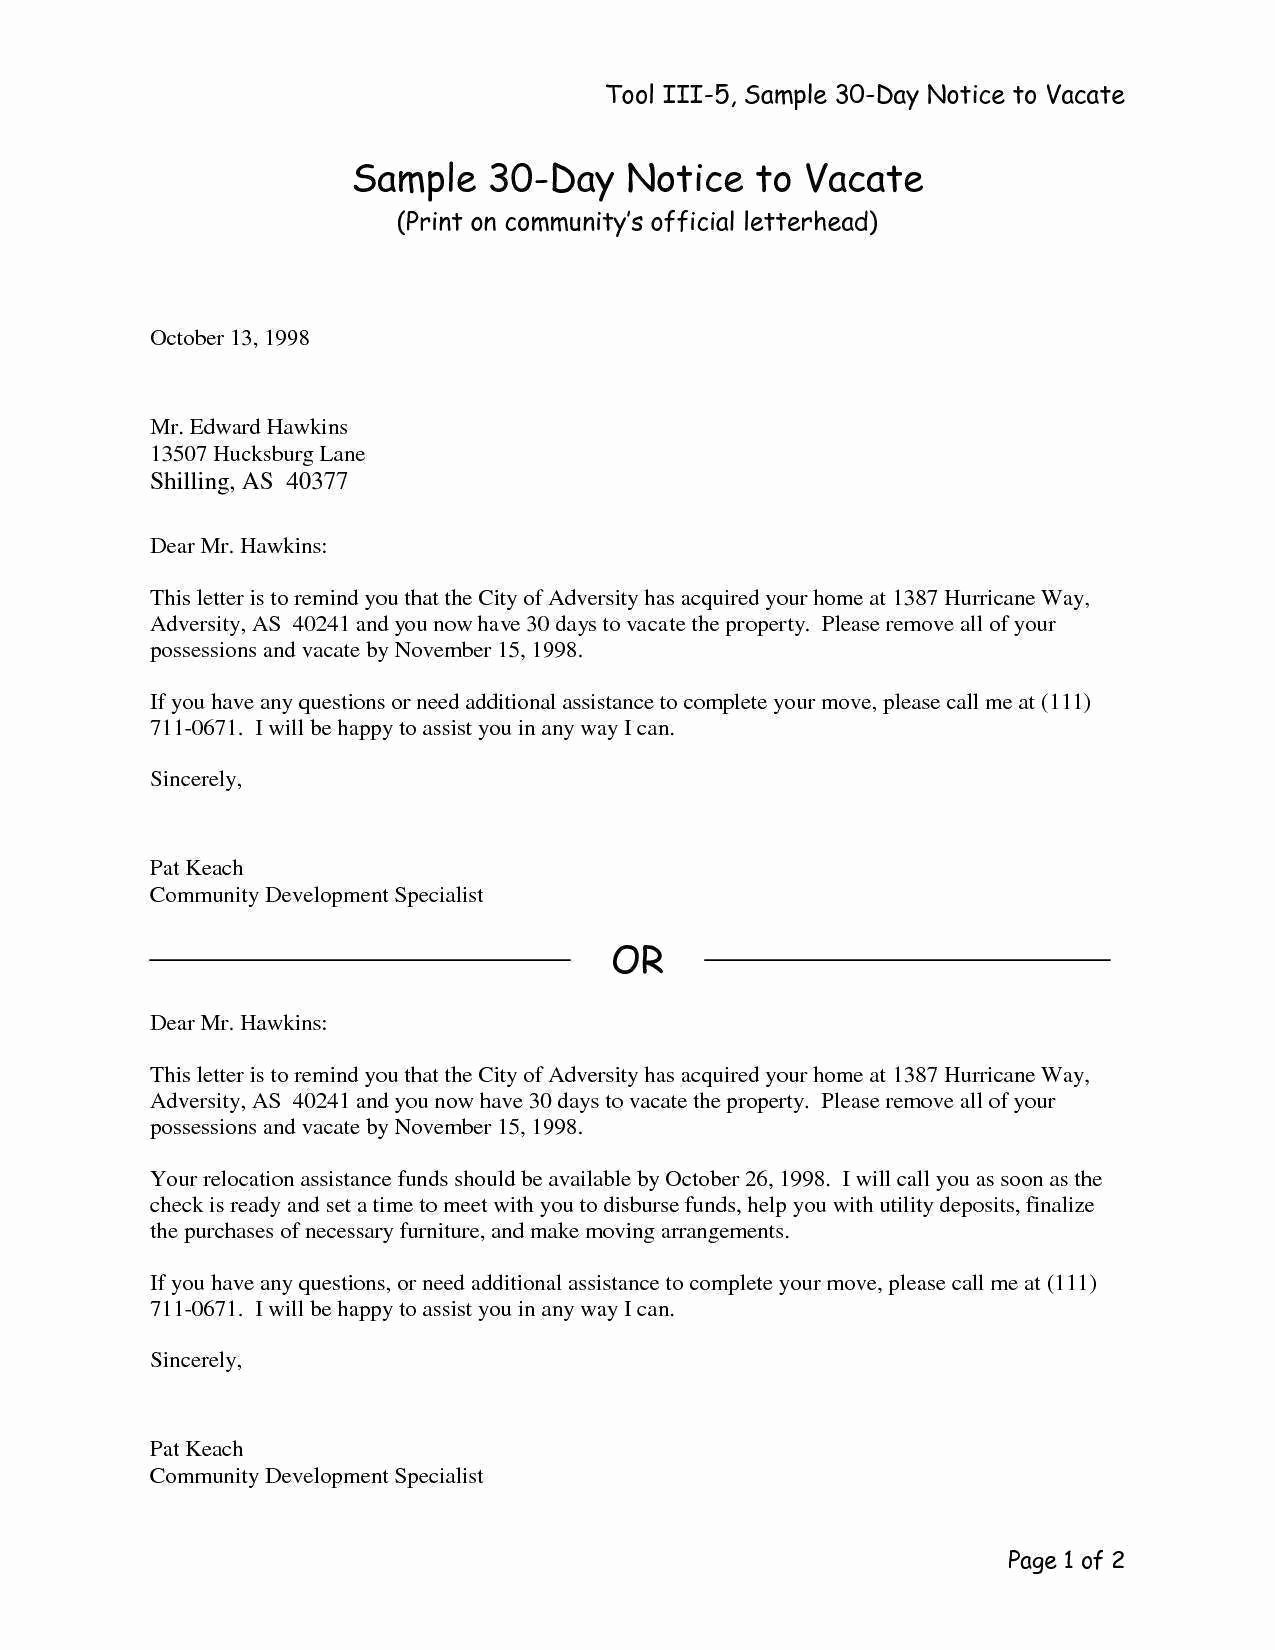 Sample Letter to Landlord for Moving Out Fresh Moving Out Letter to Landlord Template Samples